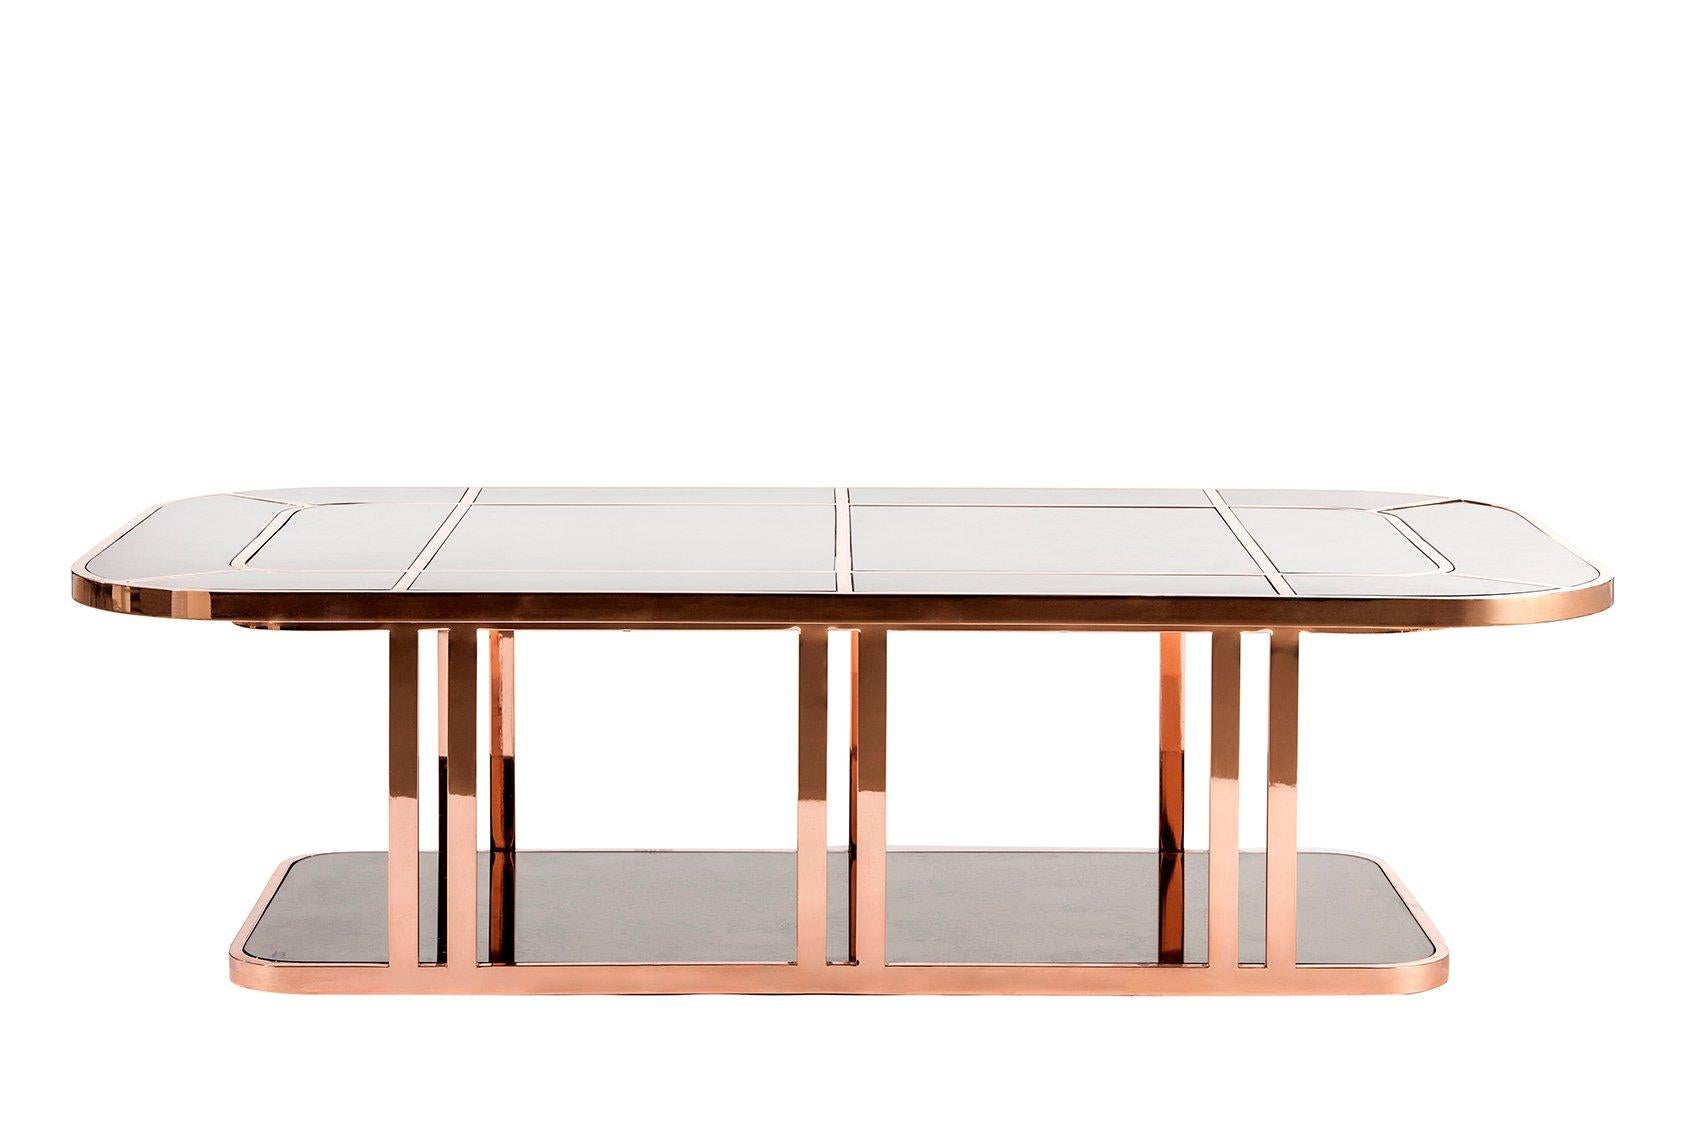 Kontra’s interpretation of Art Deco.
Brass/chrome / rose gold-plated body and vintage mirror top.
Coffee table.

